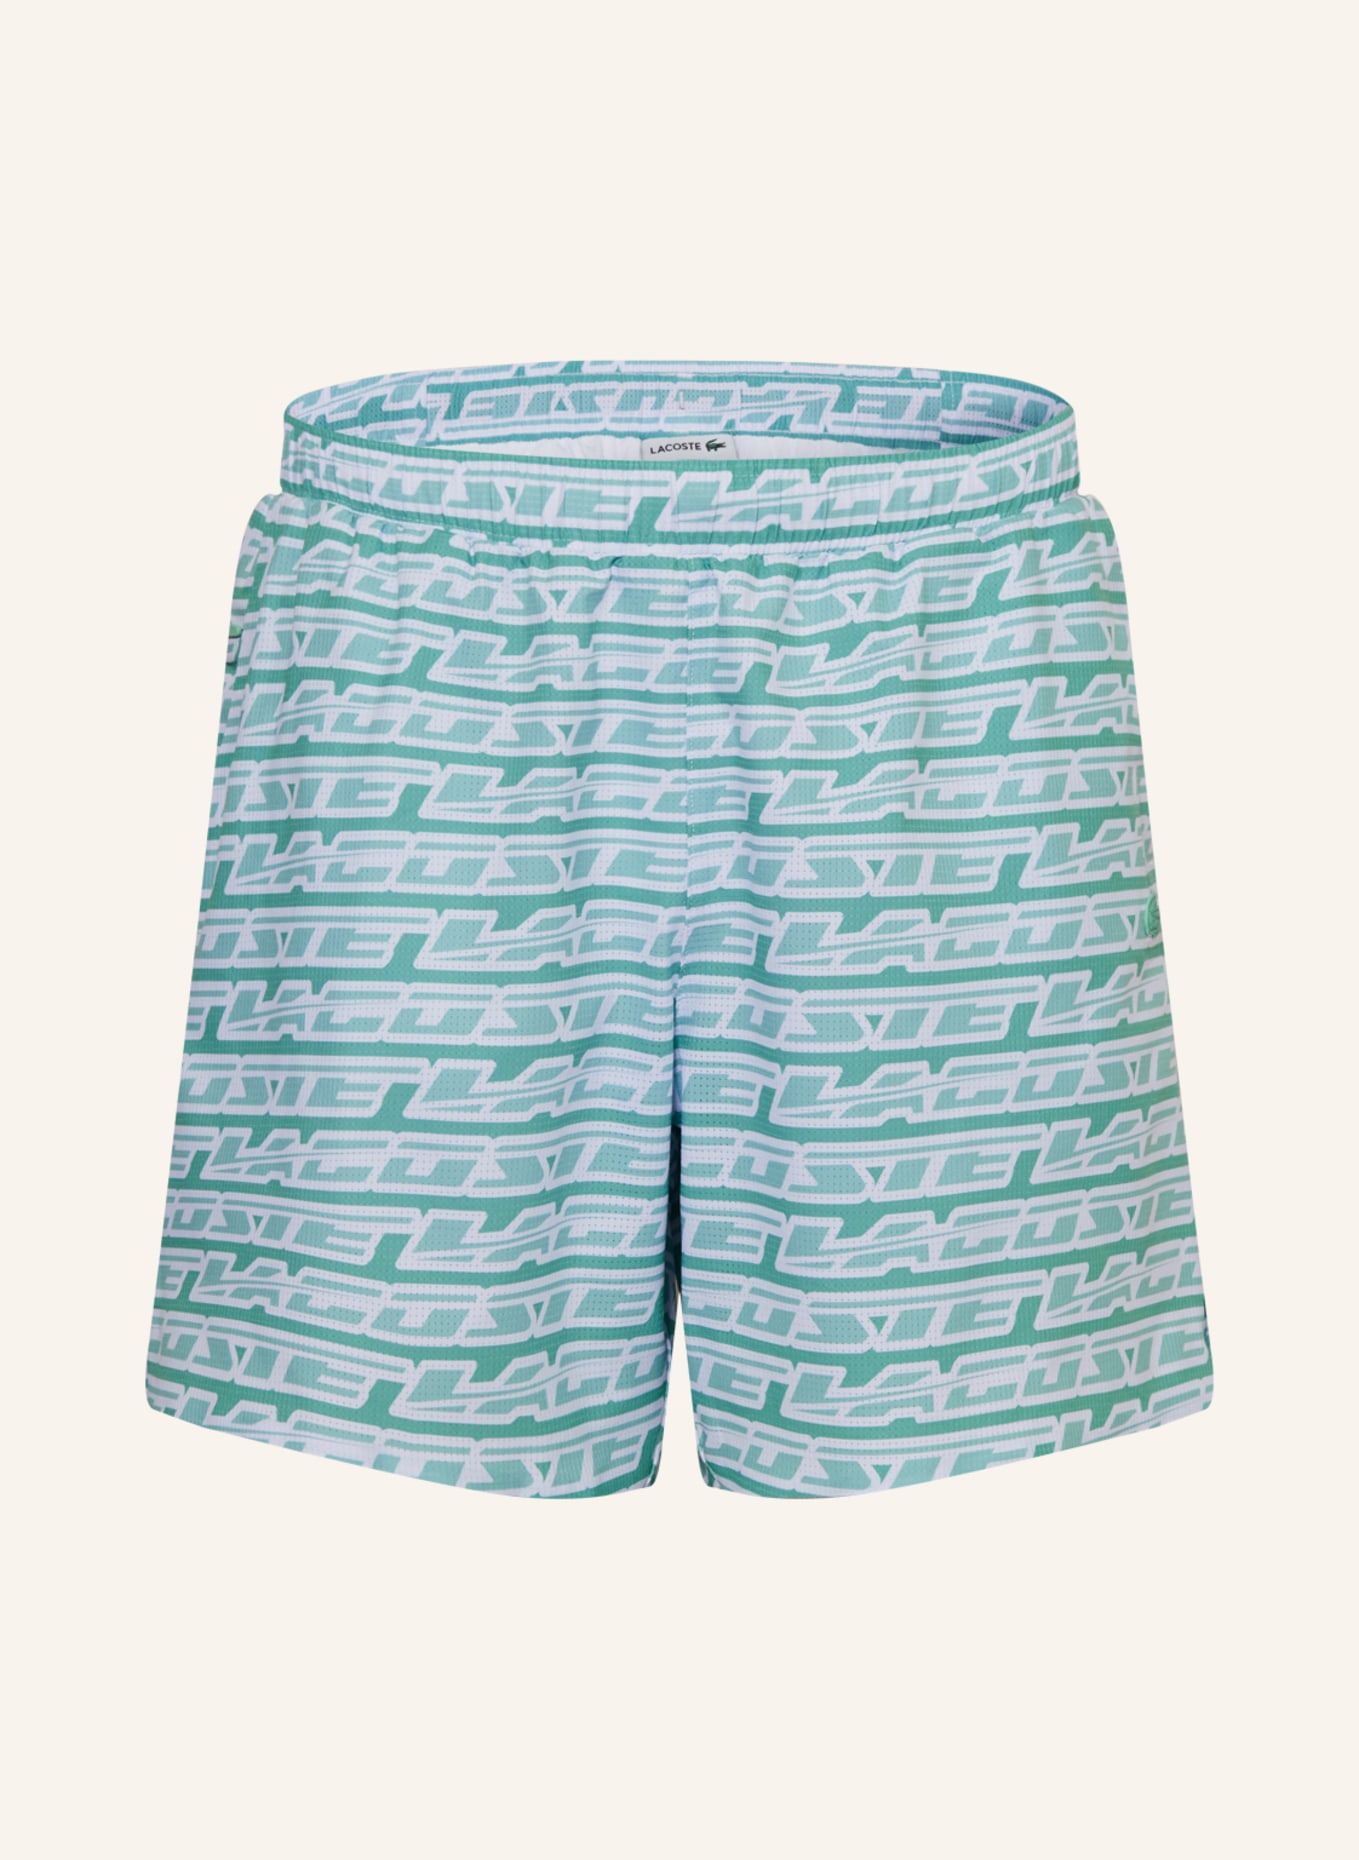 LACOSTE Badeshorts, Farbe: MINT/ WEISS(Bild null)